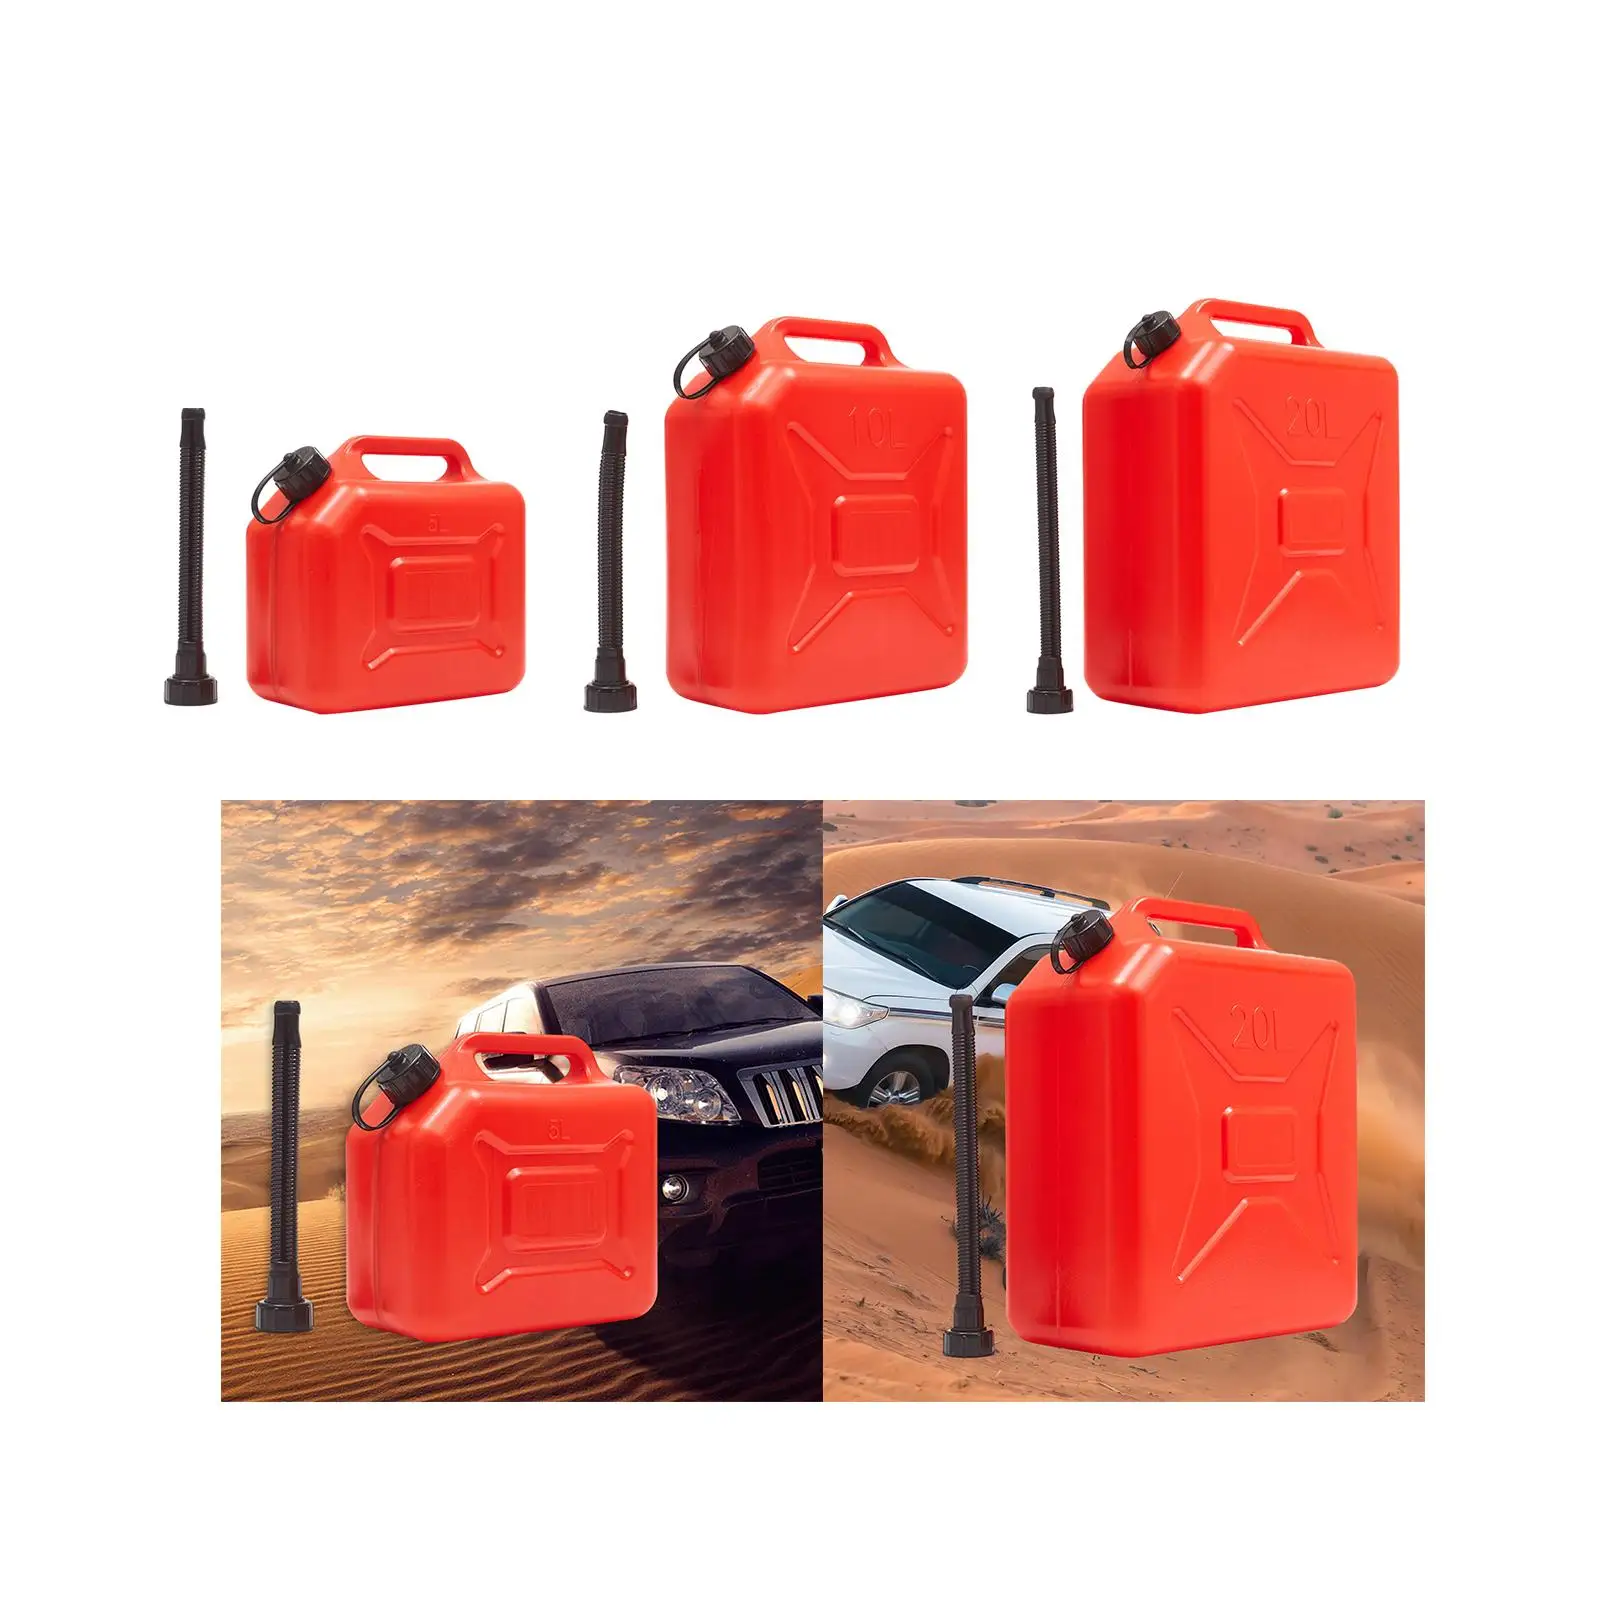 Gas Fuel Container Car Gasoline Fuel Cans Water Container Auto Fuel Can Emergency Backup Tanks Storage Container Fuel Tank